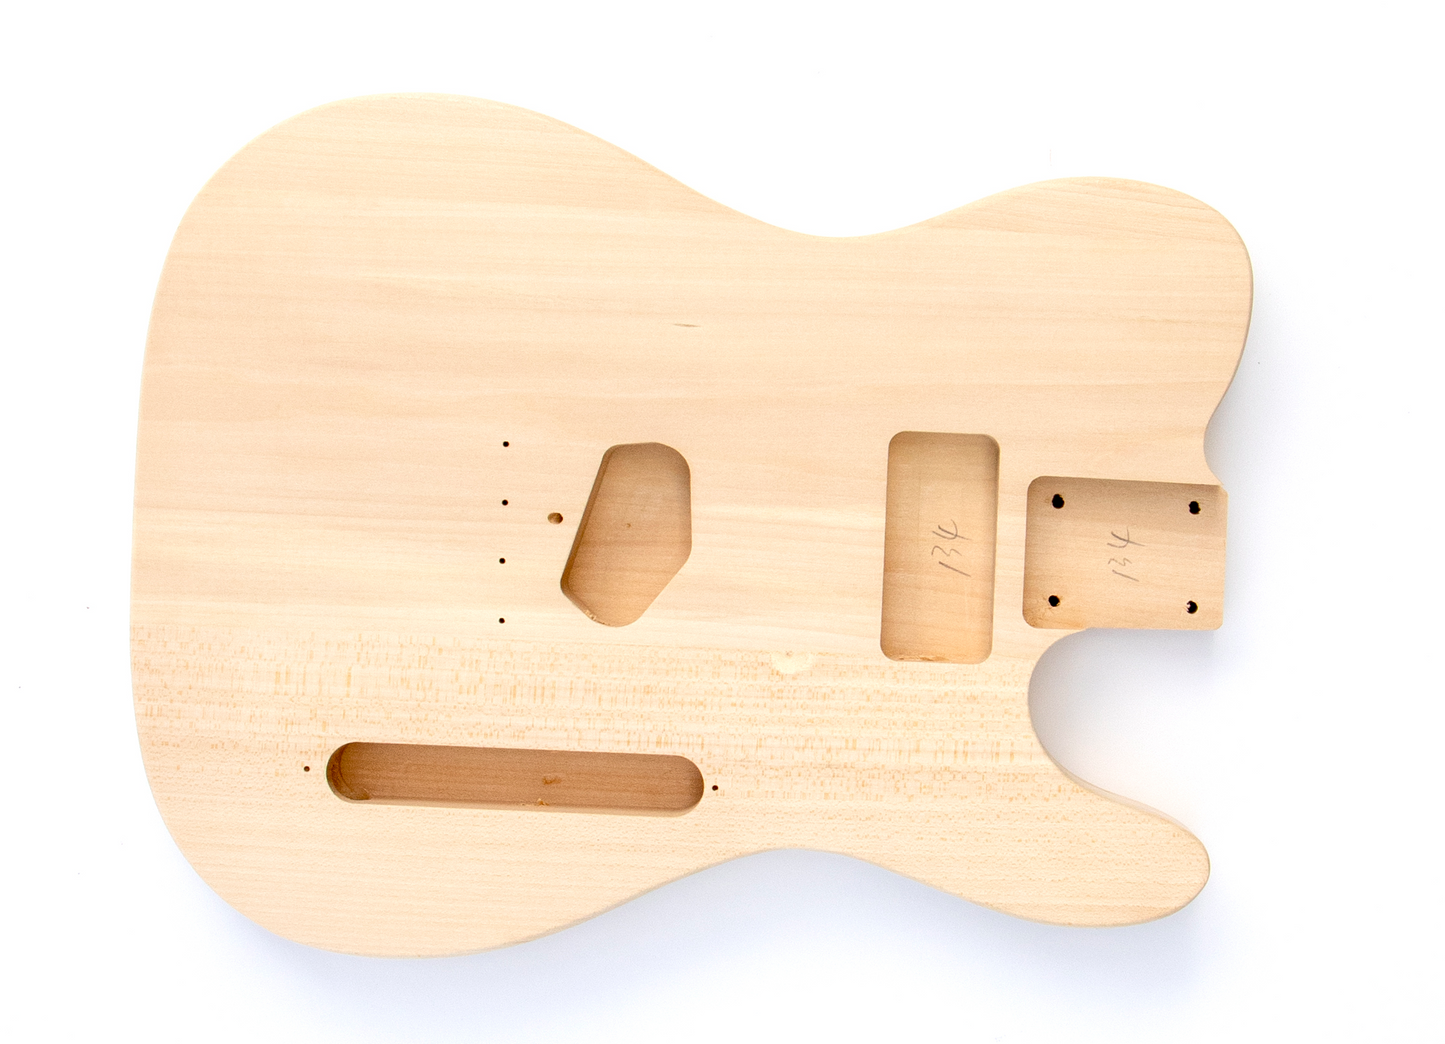 TL Style Build Your Own Guitar Kit